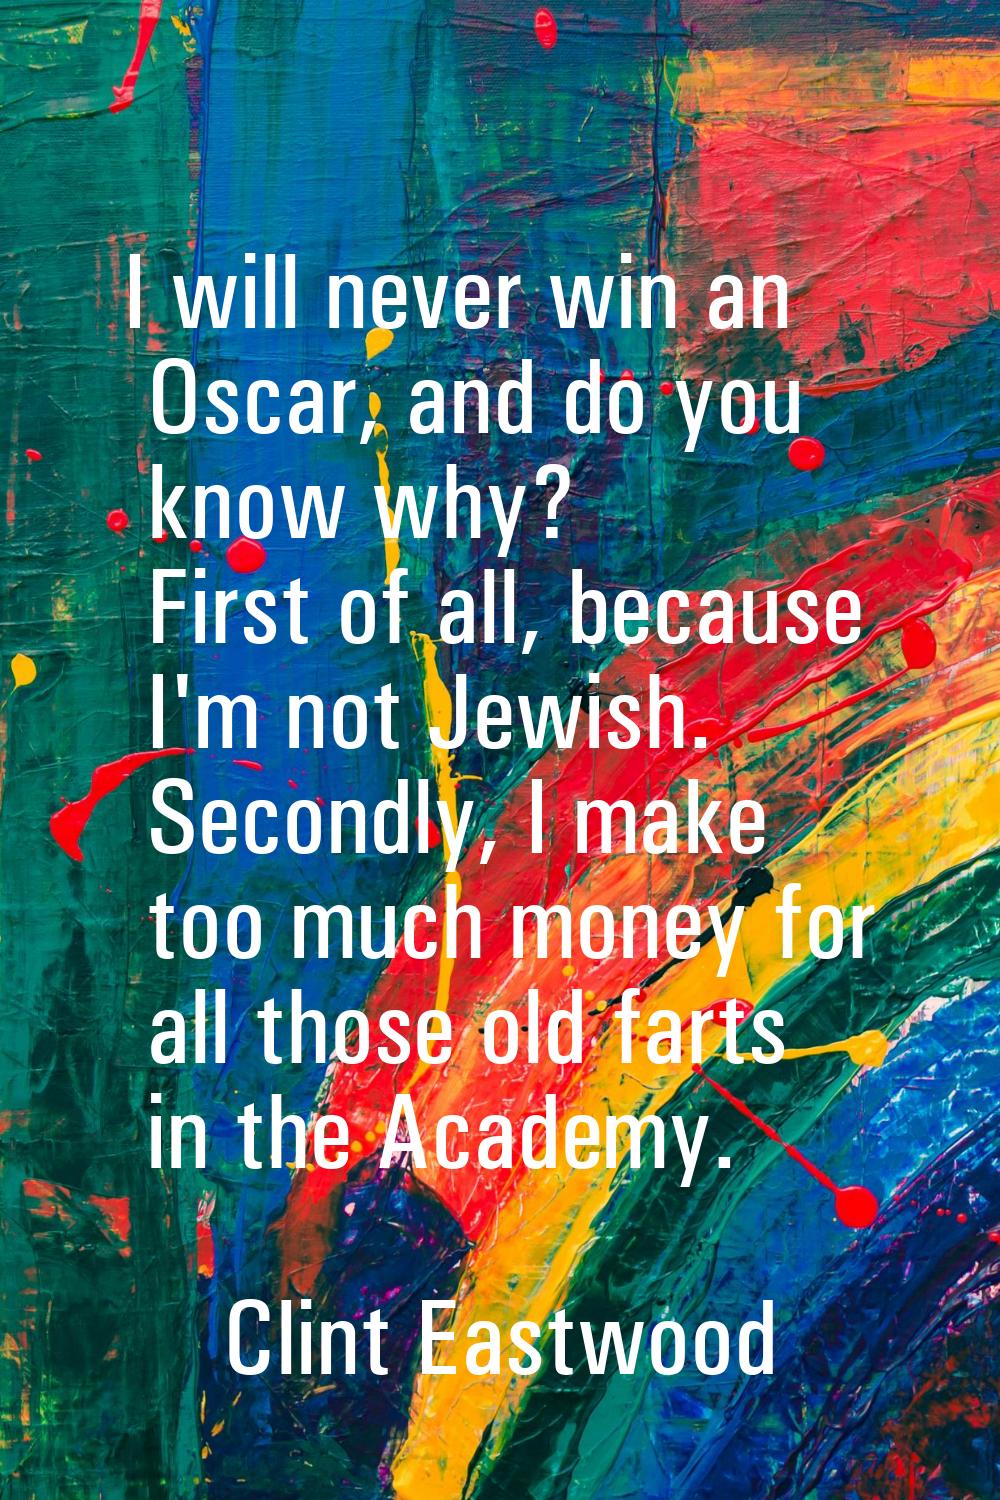 I will never win an Oscar, and do you know why? First of all, because I'm not Jewish. Secondly, I m